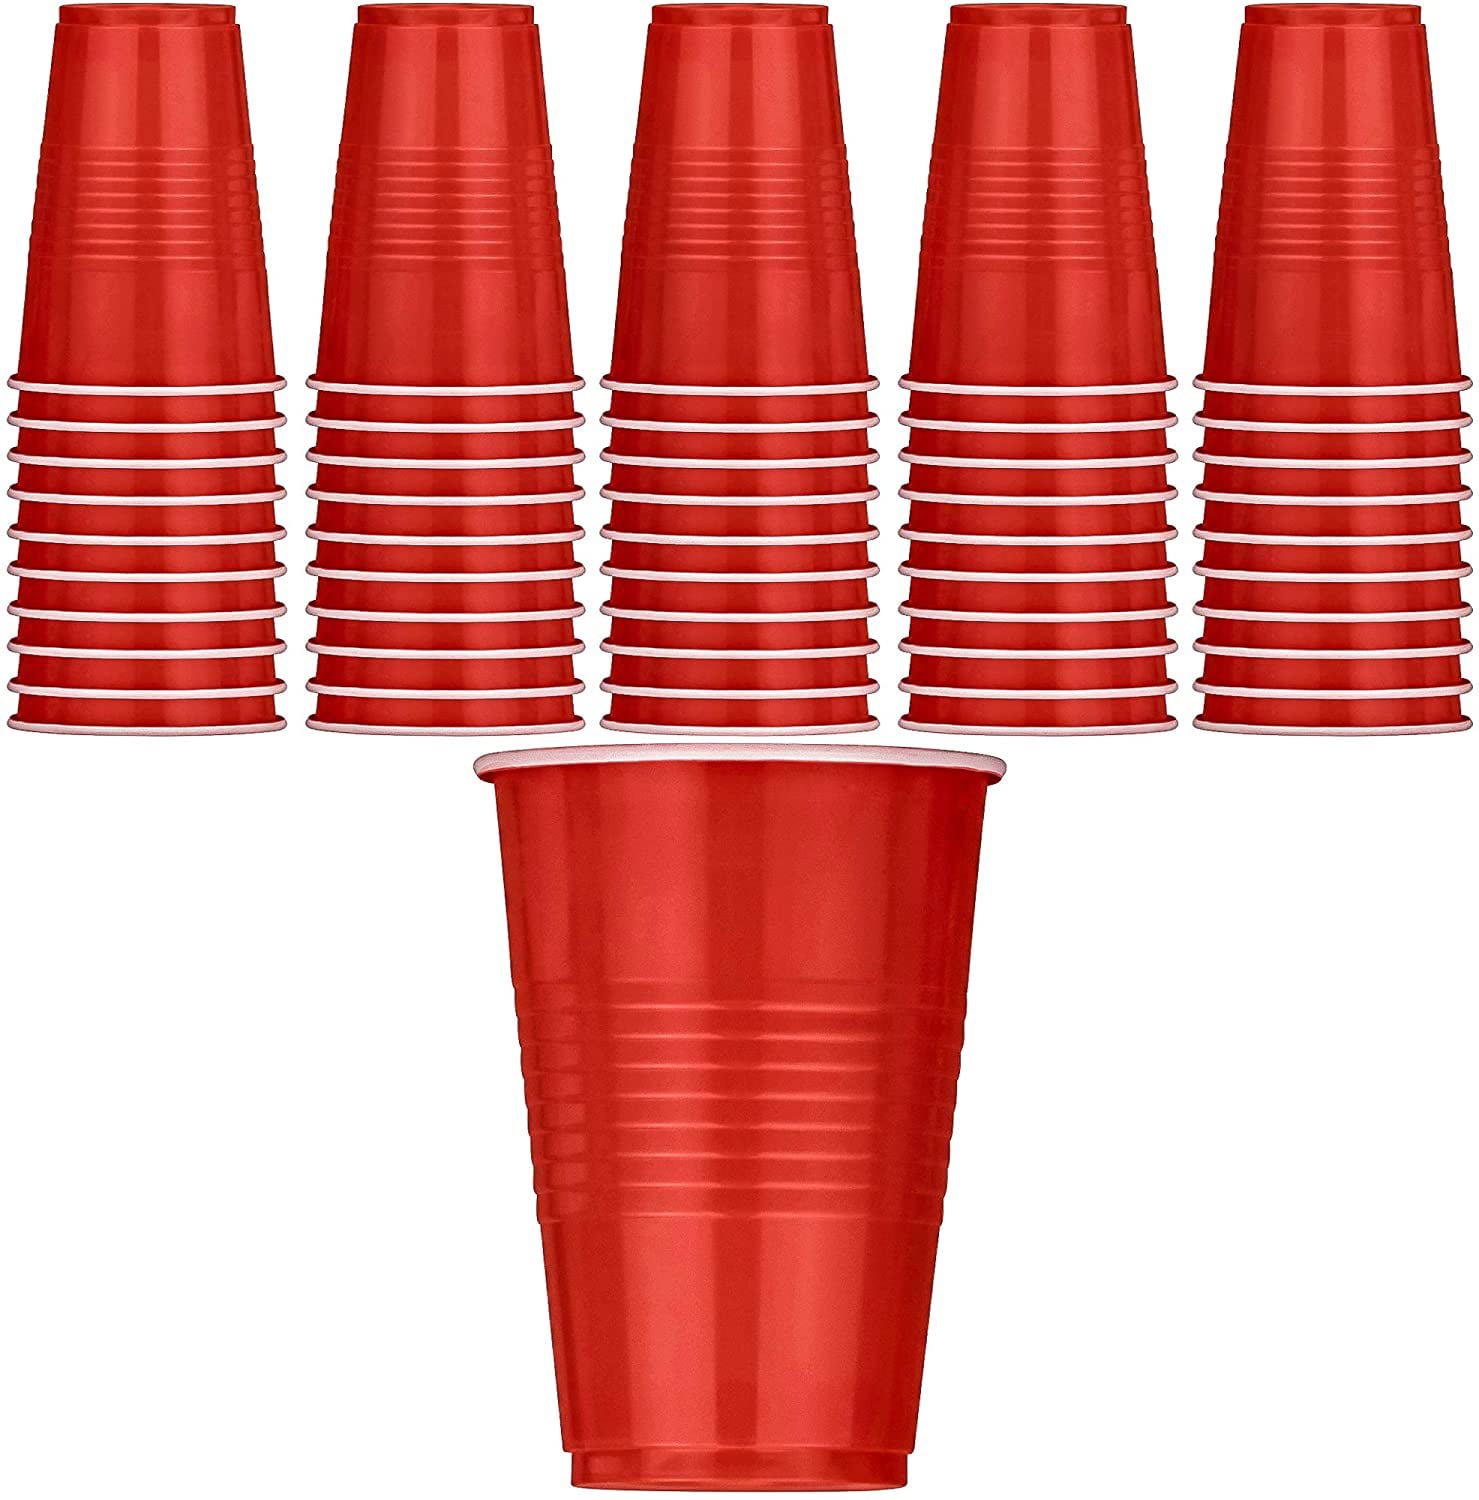 16 oz Red Party Cups, 24 pack by True, Pack of 1 - Harris Teeter